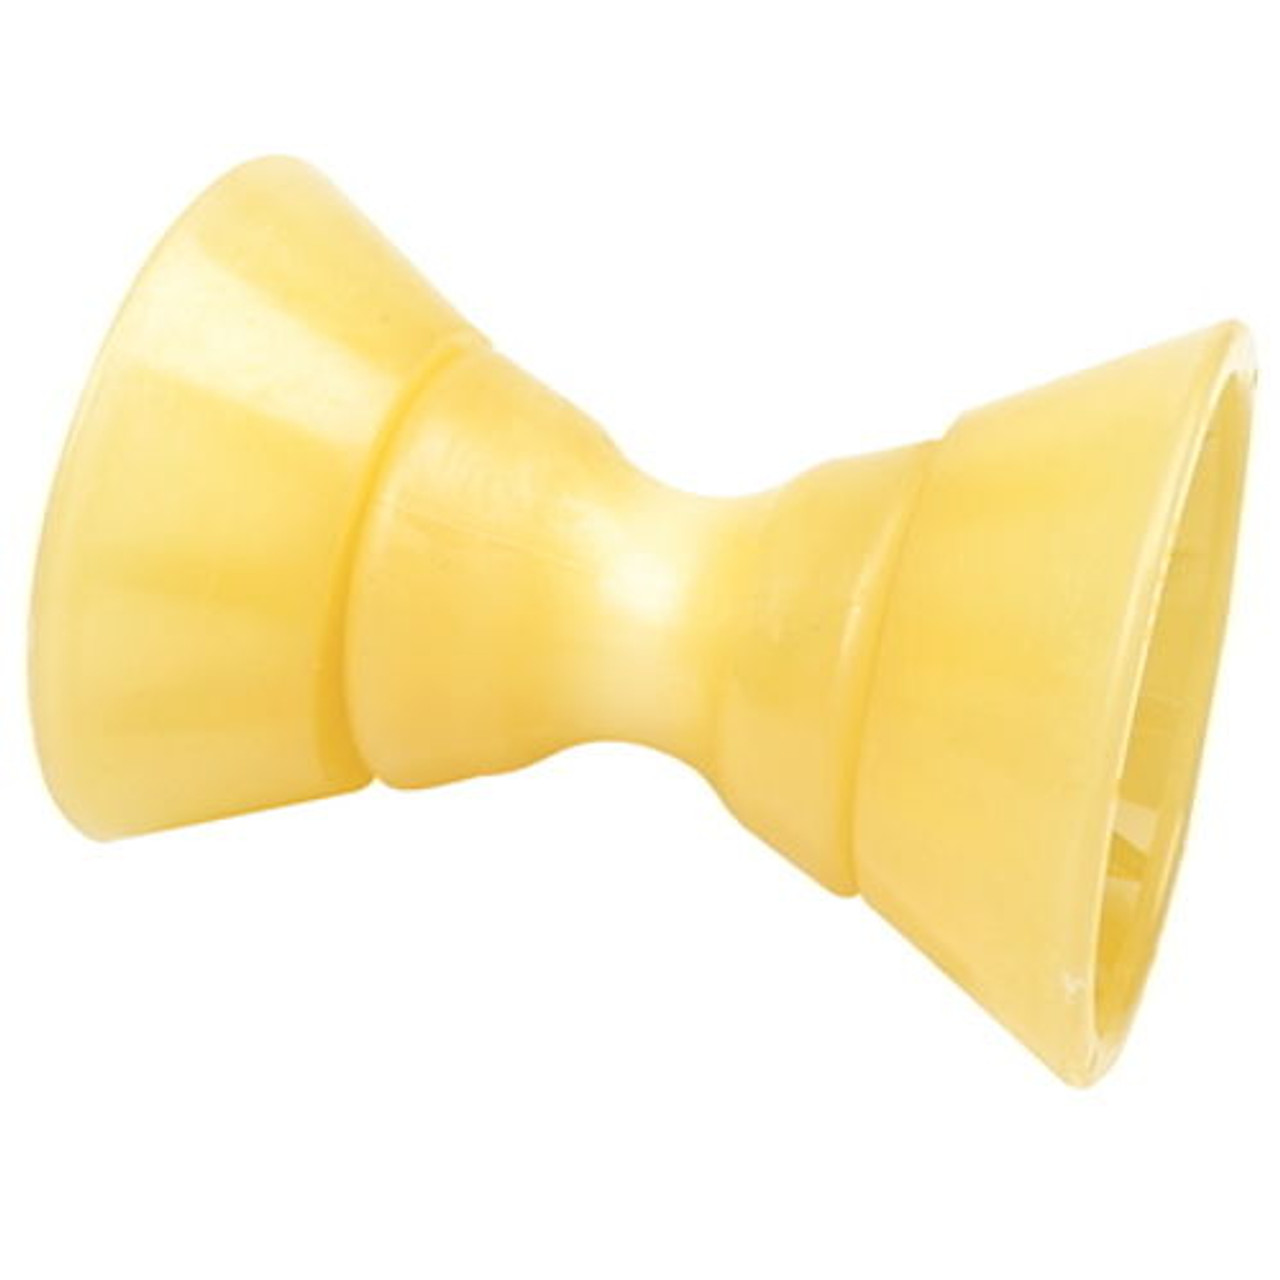 4 Inch Width Boat Trailer Non Marking Yellow Molded Rubber Bow Stop Assembly